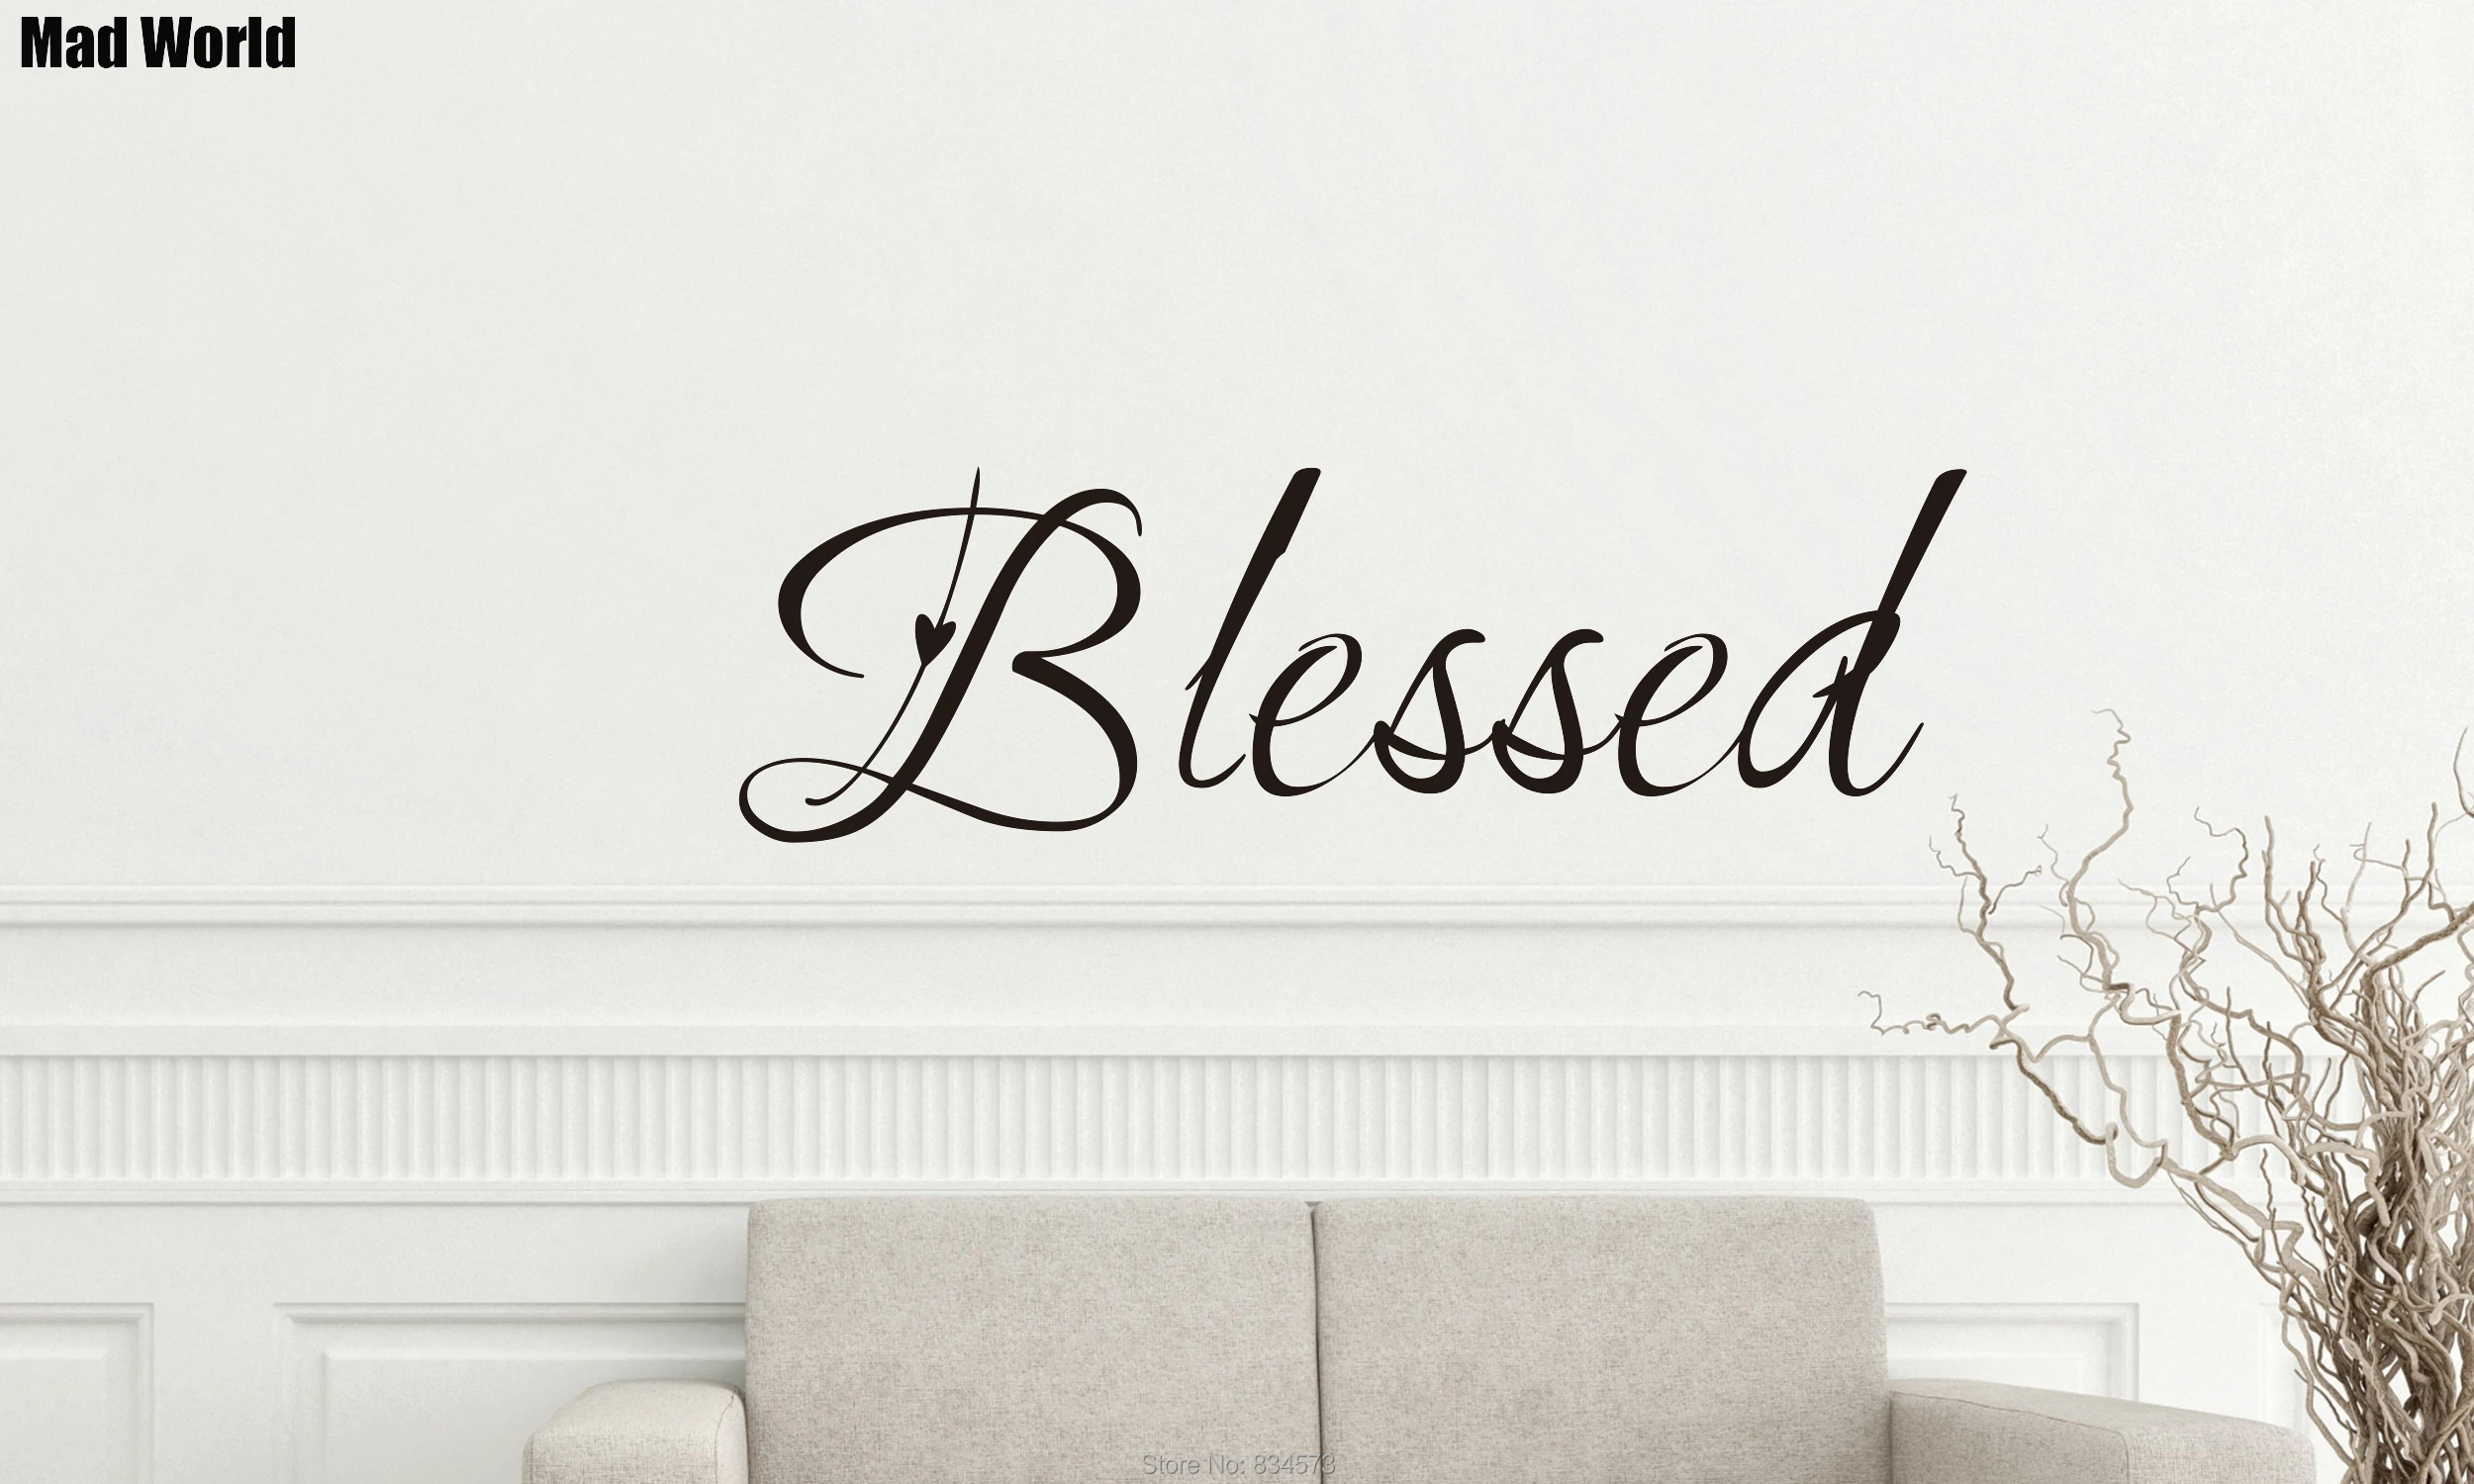 

Mad World-Blessed Inspirational Quote Saying Wall Art Sticker Wall Decals DIY Home Decoration Removable Room Decor Wall Stickers